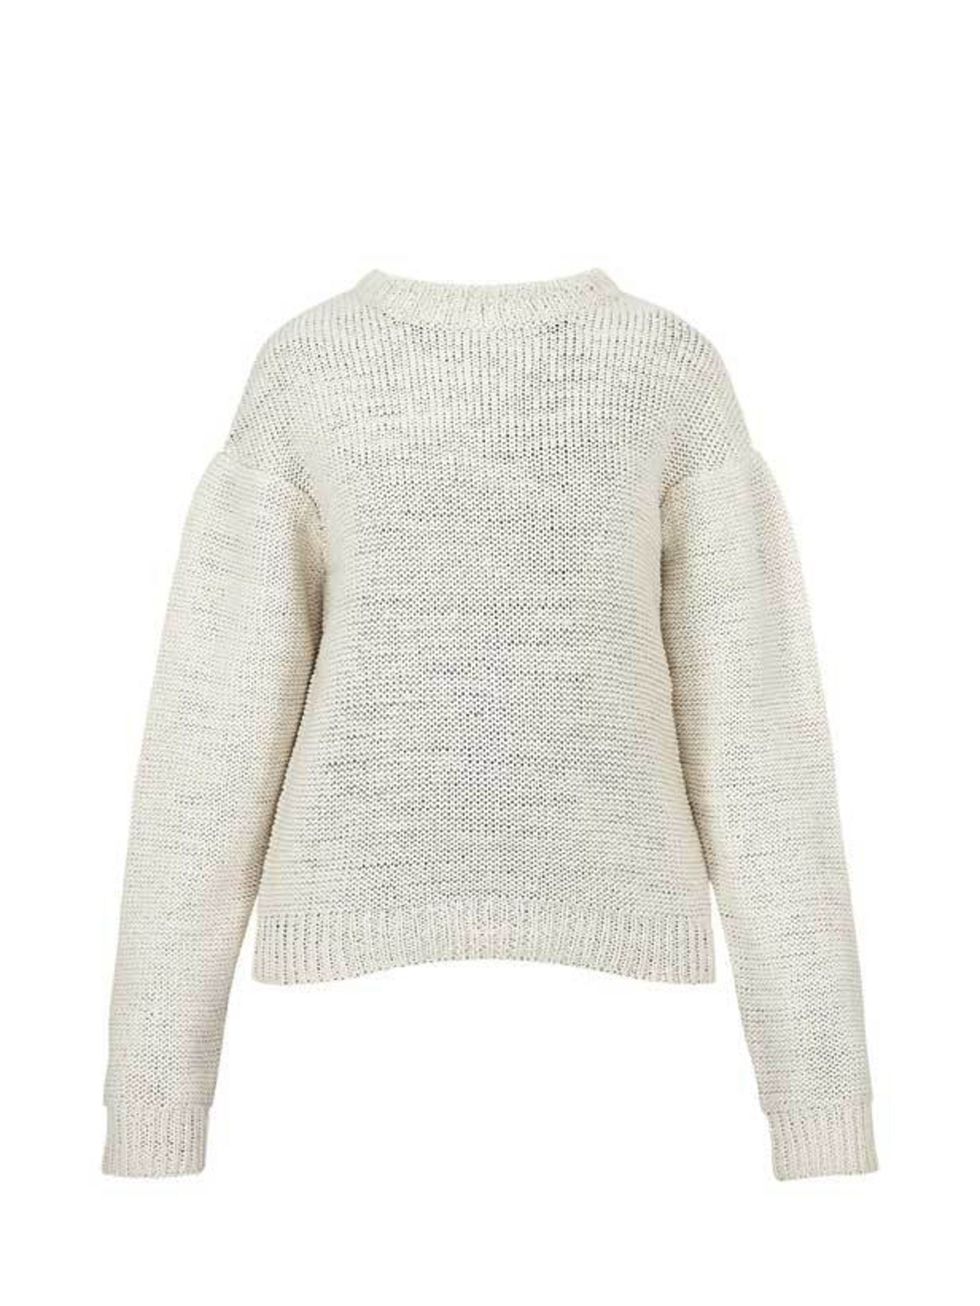 <p><a href="http://www.cosstores.com/gb/site/home__start.nhtml"> </a></p><p>Looking for some weekend dressing inspiration? Team this chic knit with a pair of navy peg legs and tan brogues... <a href="http://www.cosstores.com/gb/site/home__start.nhtml">COS